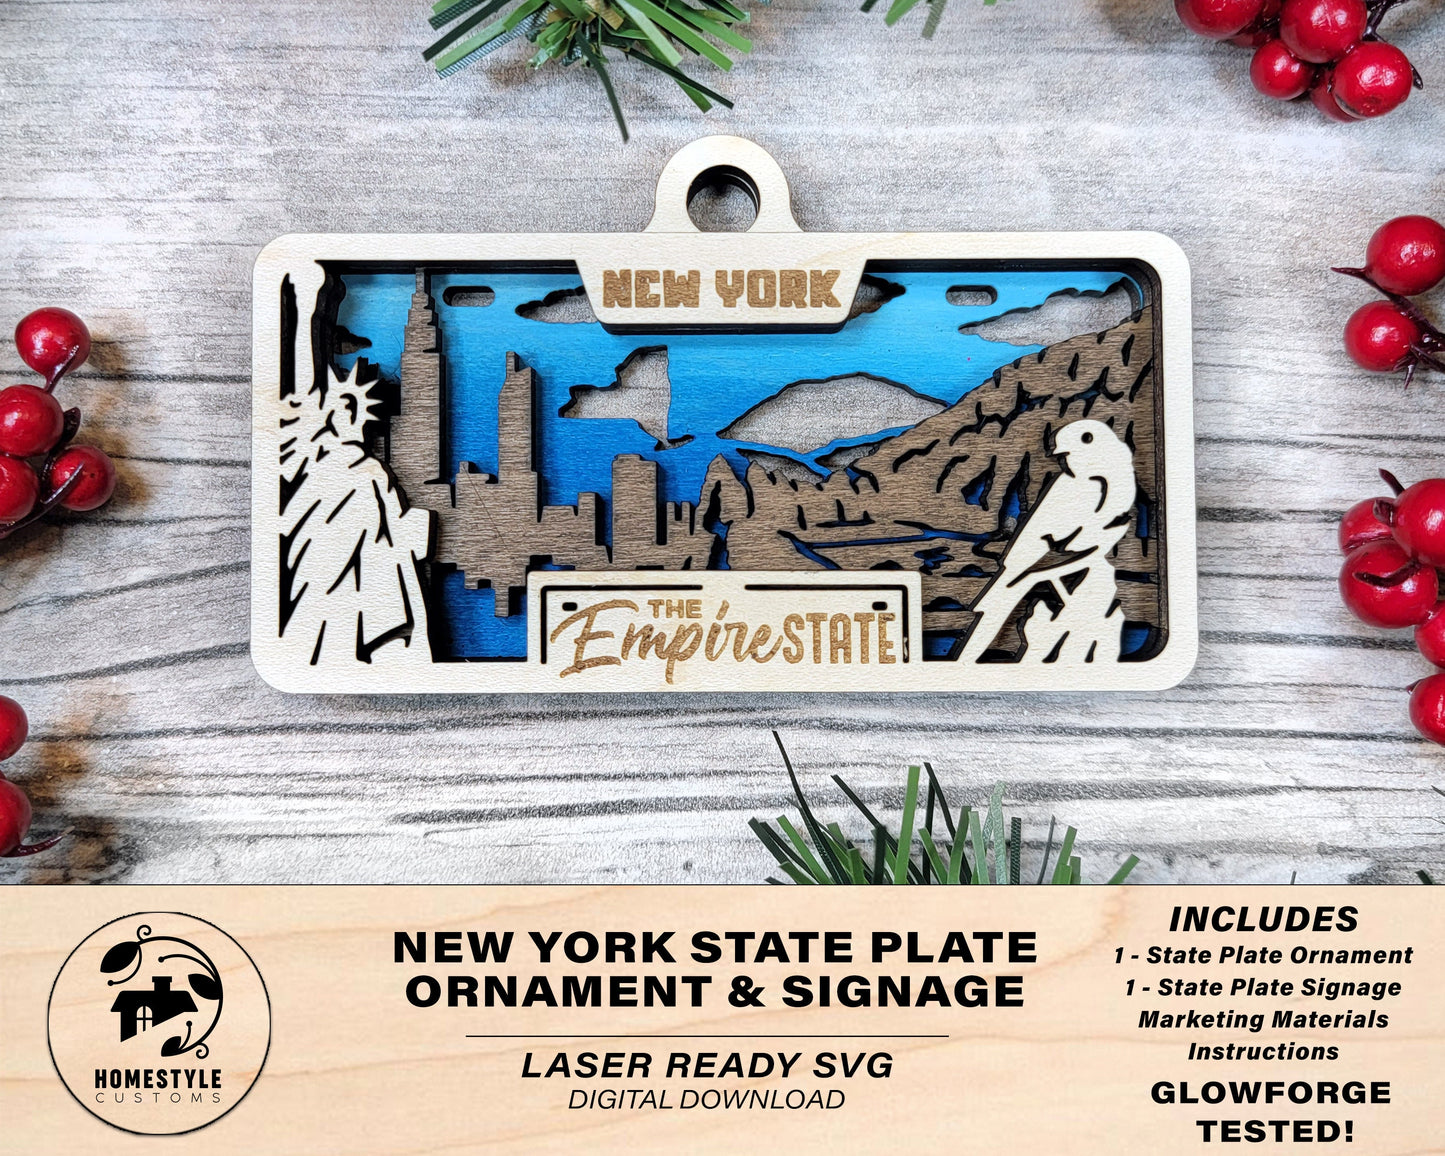 New York State Plate Ornament and Signage - SVG File Download - Sized for Glowforge - Laser Ready Digital Files